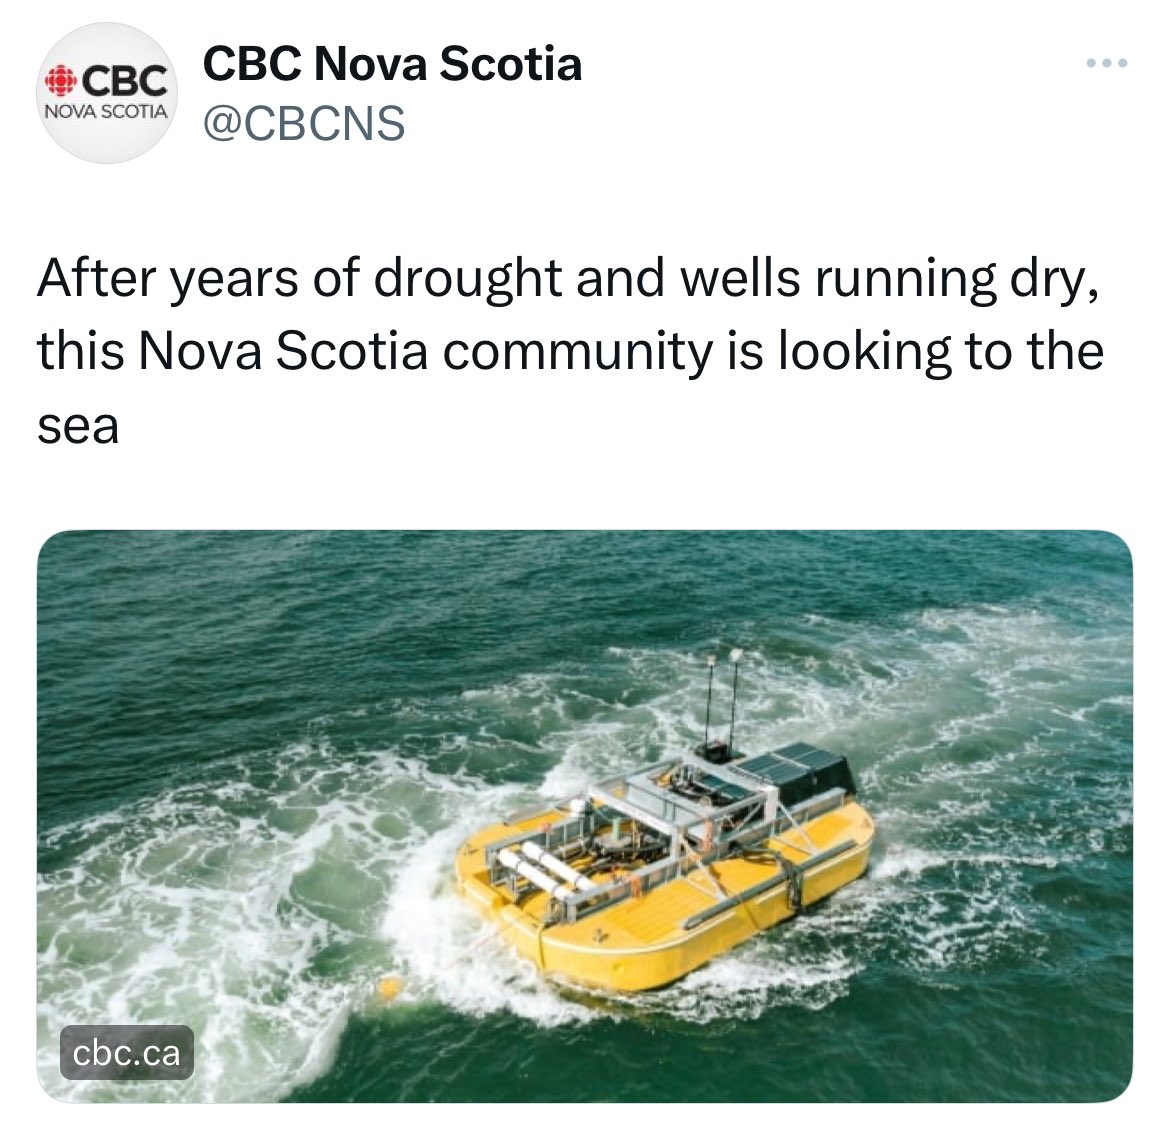 This should be a priority!

( repost: @cbcns )
#NocaScotia #cbc #droughts #wells #canada #canadanews #novascotialife #canadalife #struggle #economy #cdnpoli #nspoli #news #liberal #conservative #ndp #watersupply